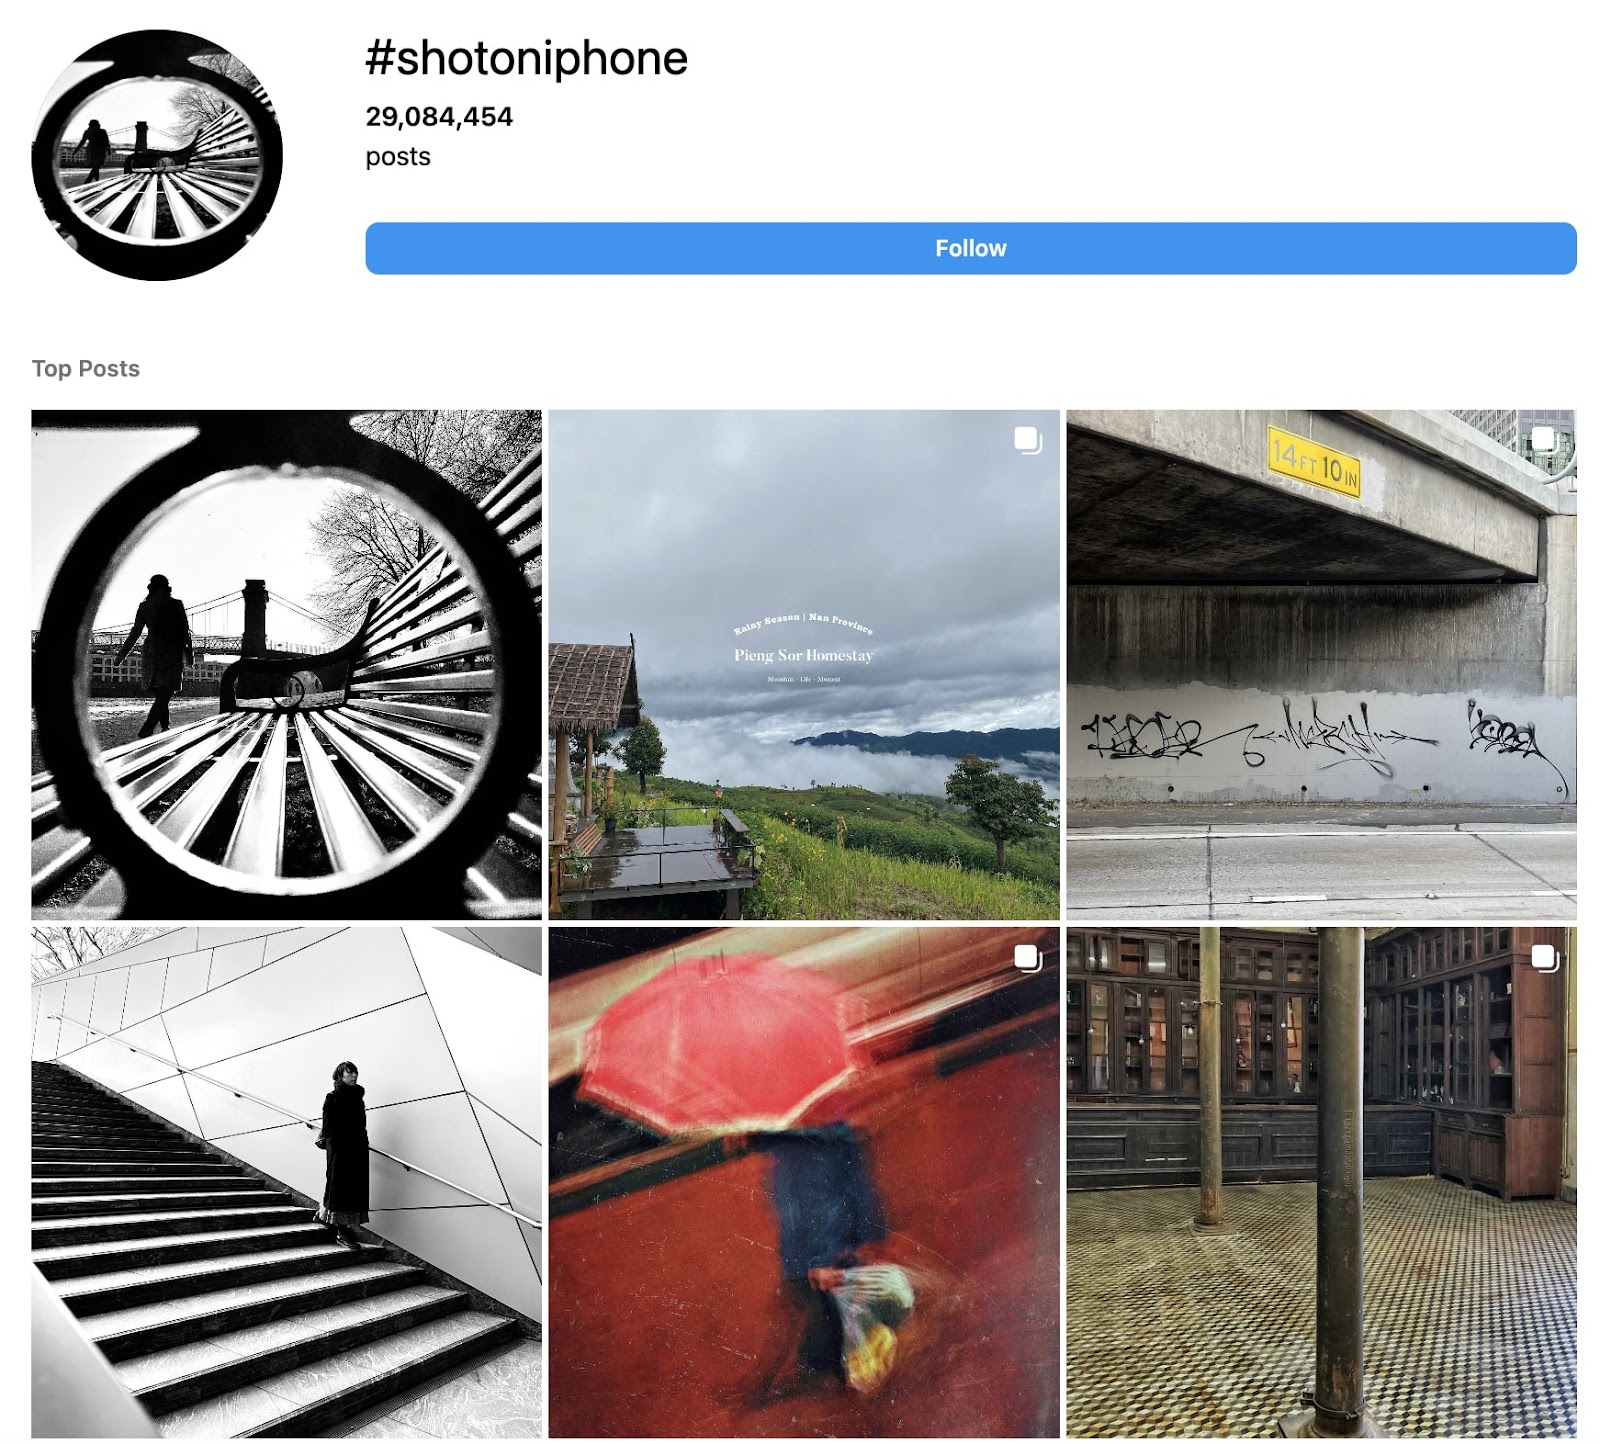 #shotoniphone posts on Instagram page